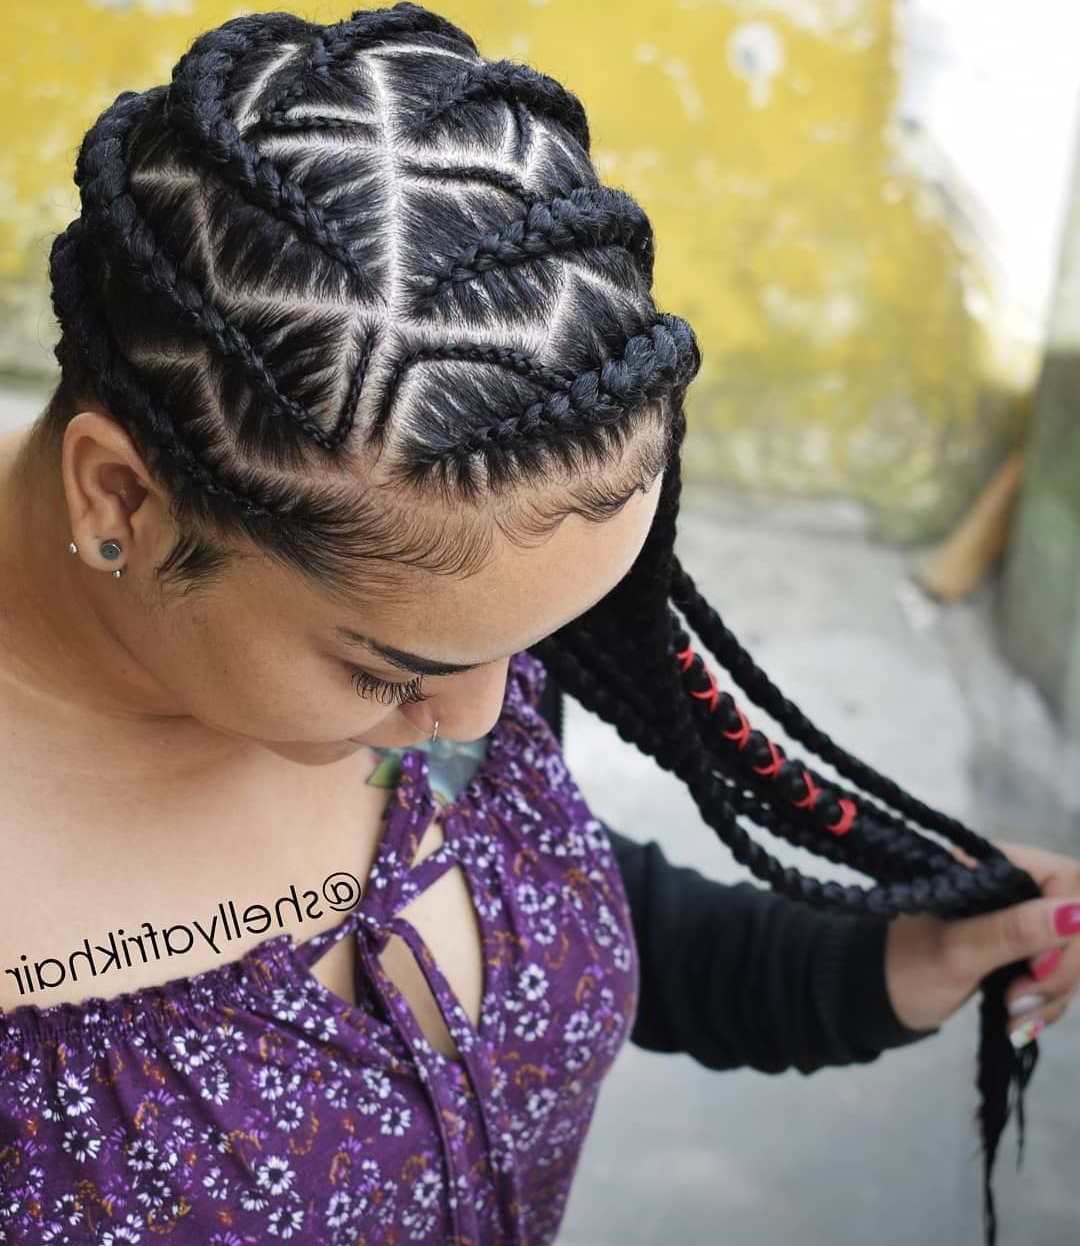 20 Head Turning Lemonade Braid Styles For All Ages Inside Most Popular Metallic Side Cornrows Hairstyles (View 9 of 20)